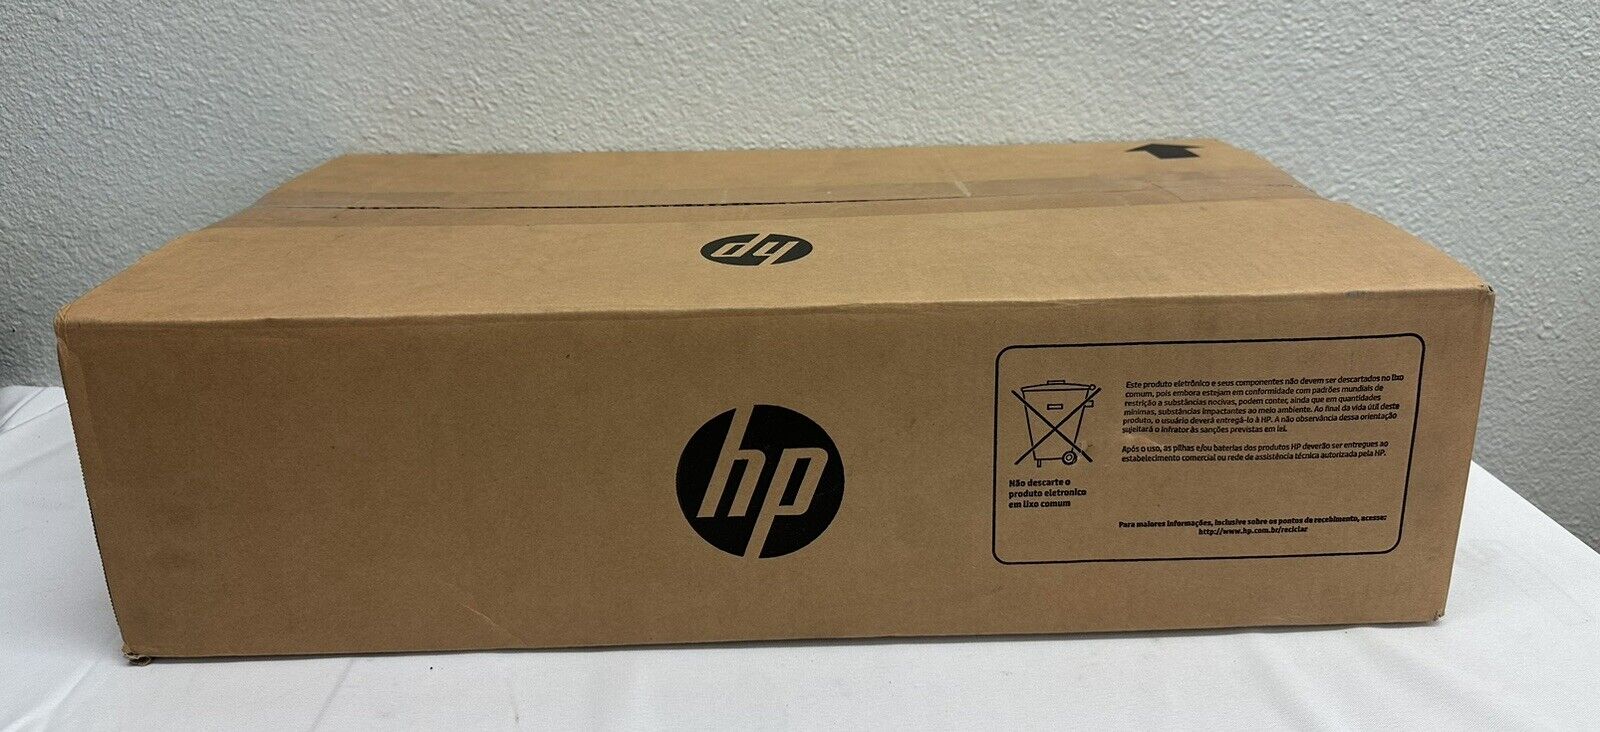 HP Y1G10A 2/3-Hole Punch Accessory NEW Factory Sealed***